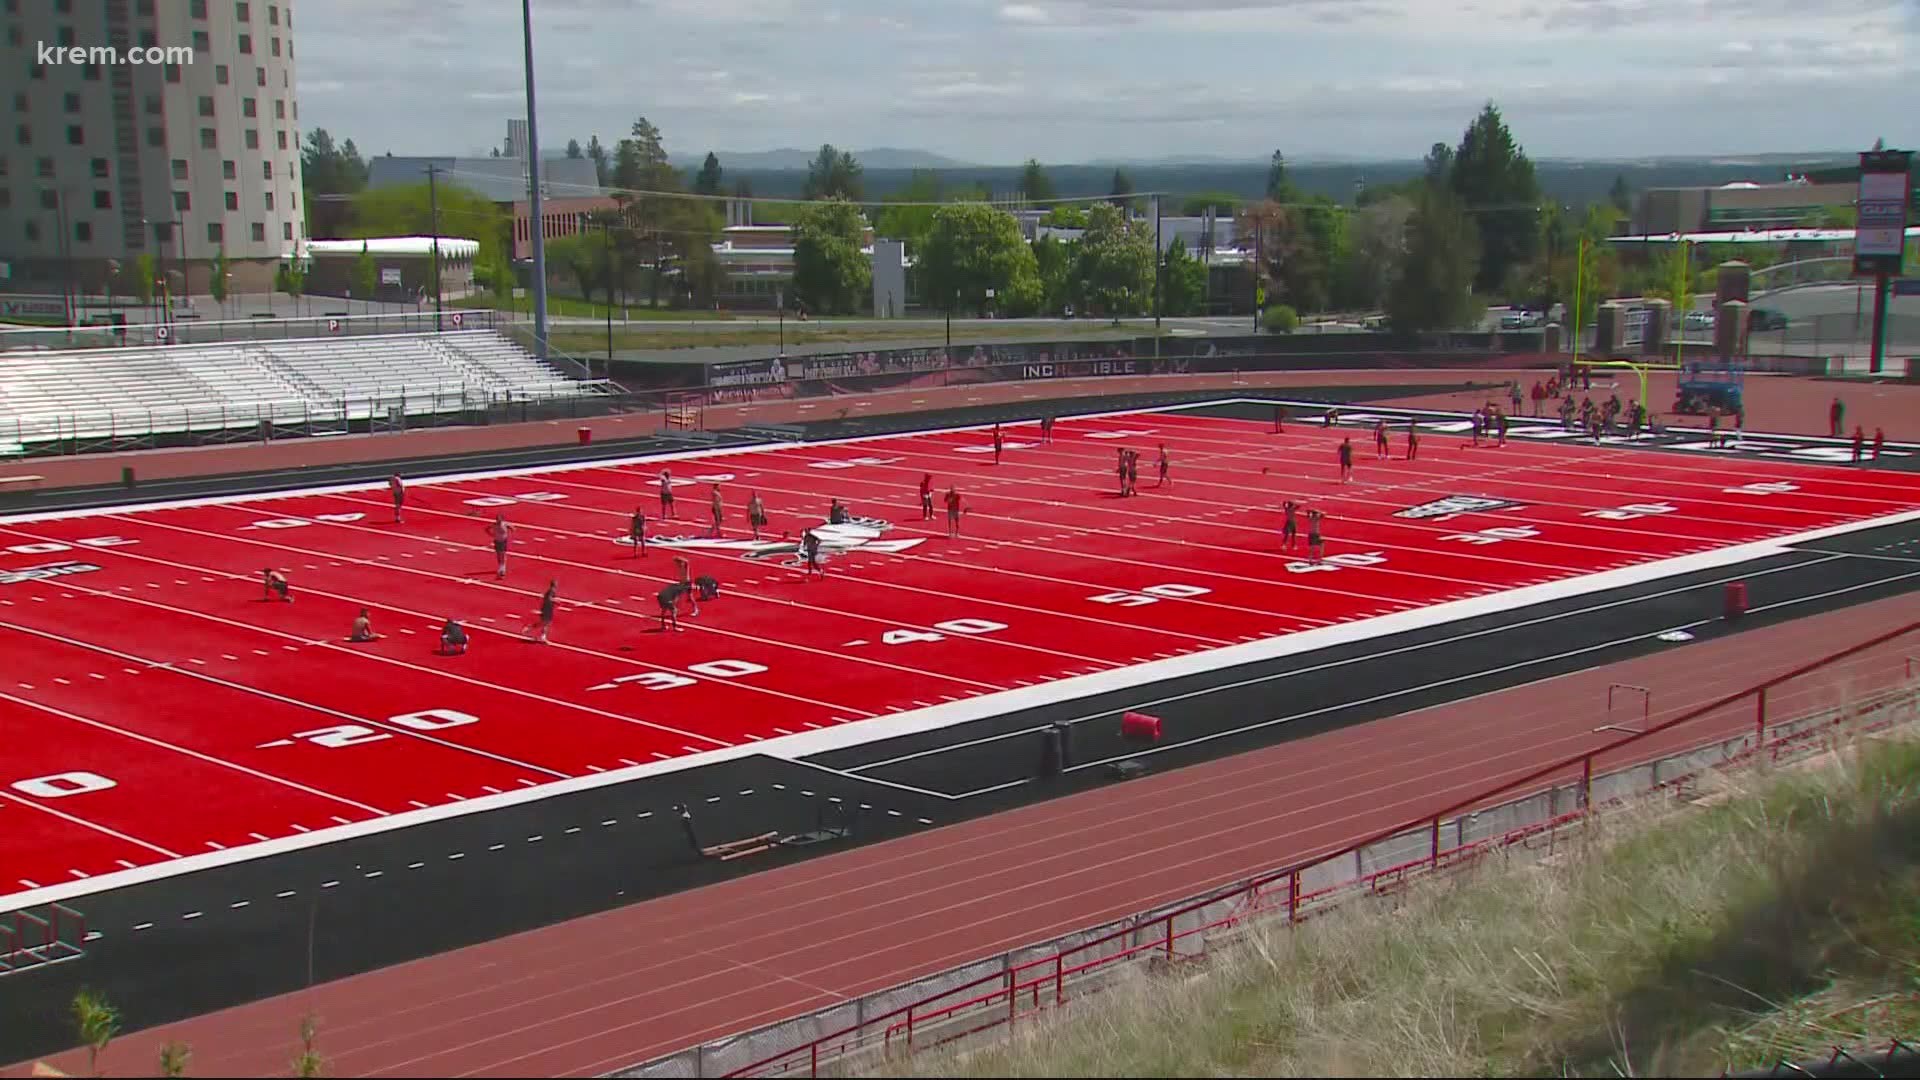 The Board of Trustees at EWU will make their final decision on the matter on June 11.